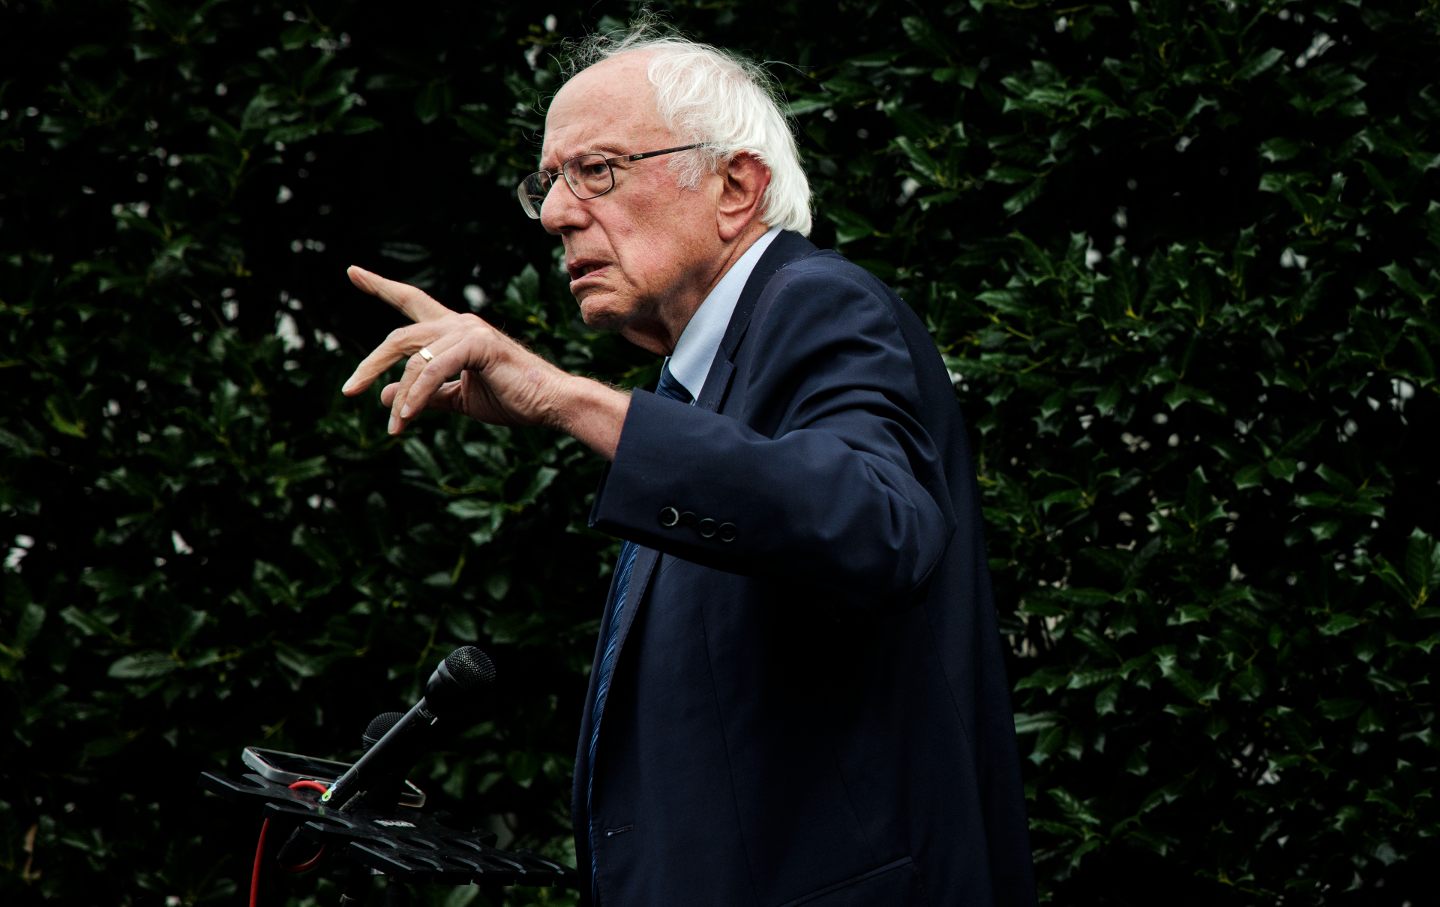 Senator Bernie Sanders (D-VT) speaks to reporters in front of the West Wing after meeting with President Joe Biden at the White House on August 30, 2023 in Washington, D.C.